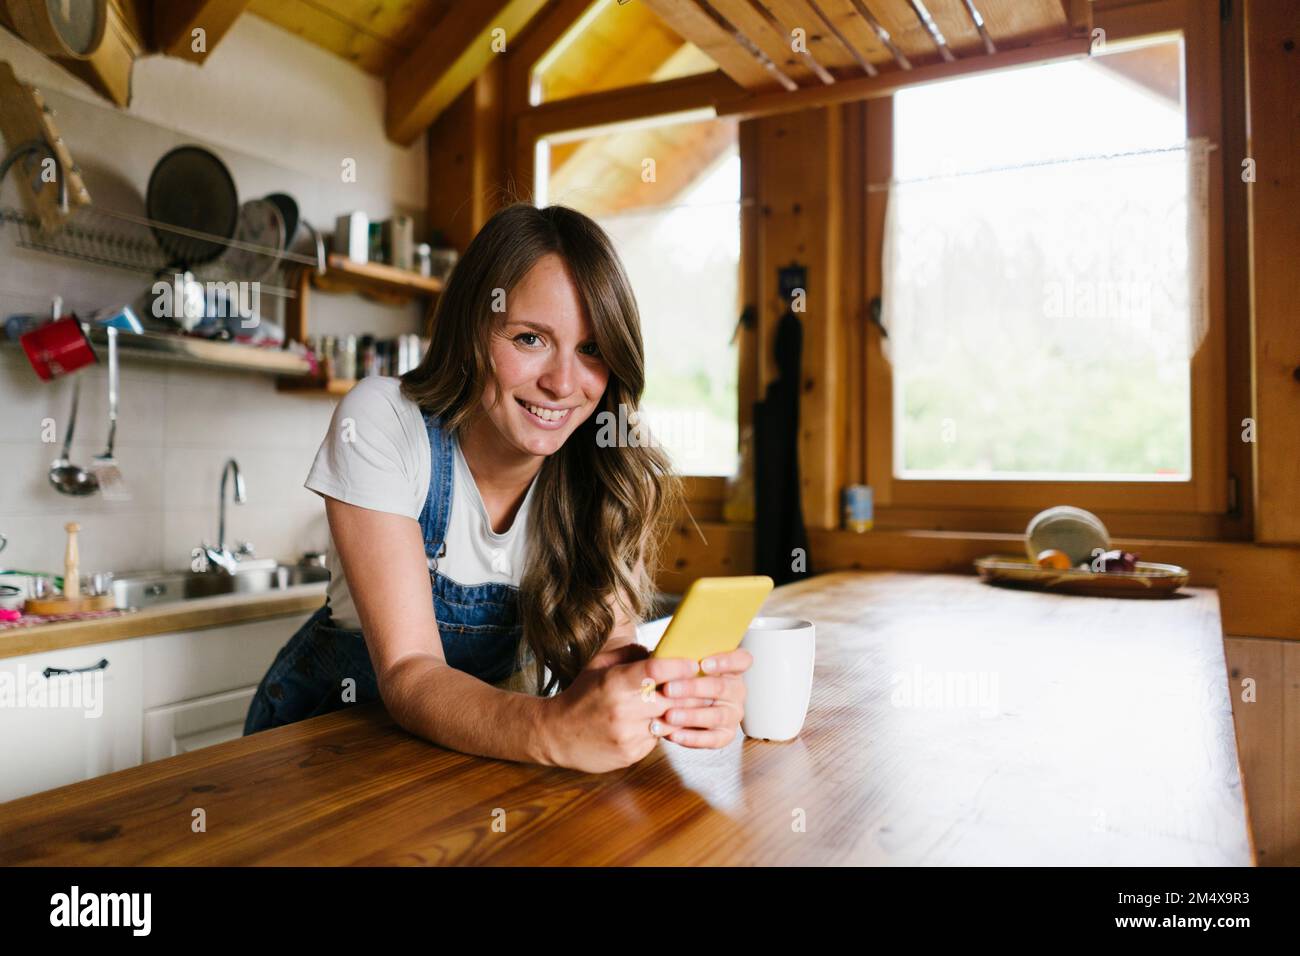 Smiling young woman leaning with smart phone on kitchen island Stock Photo